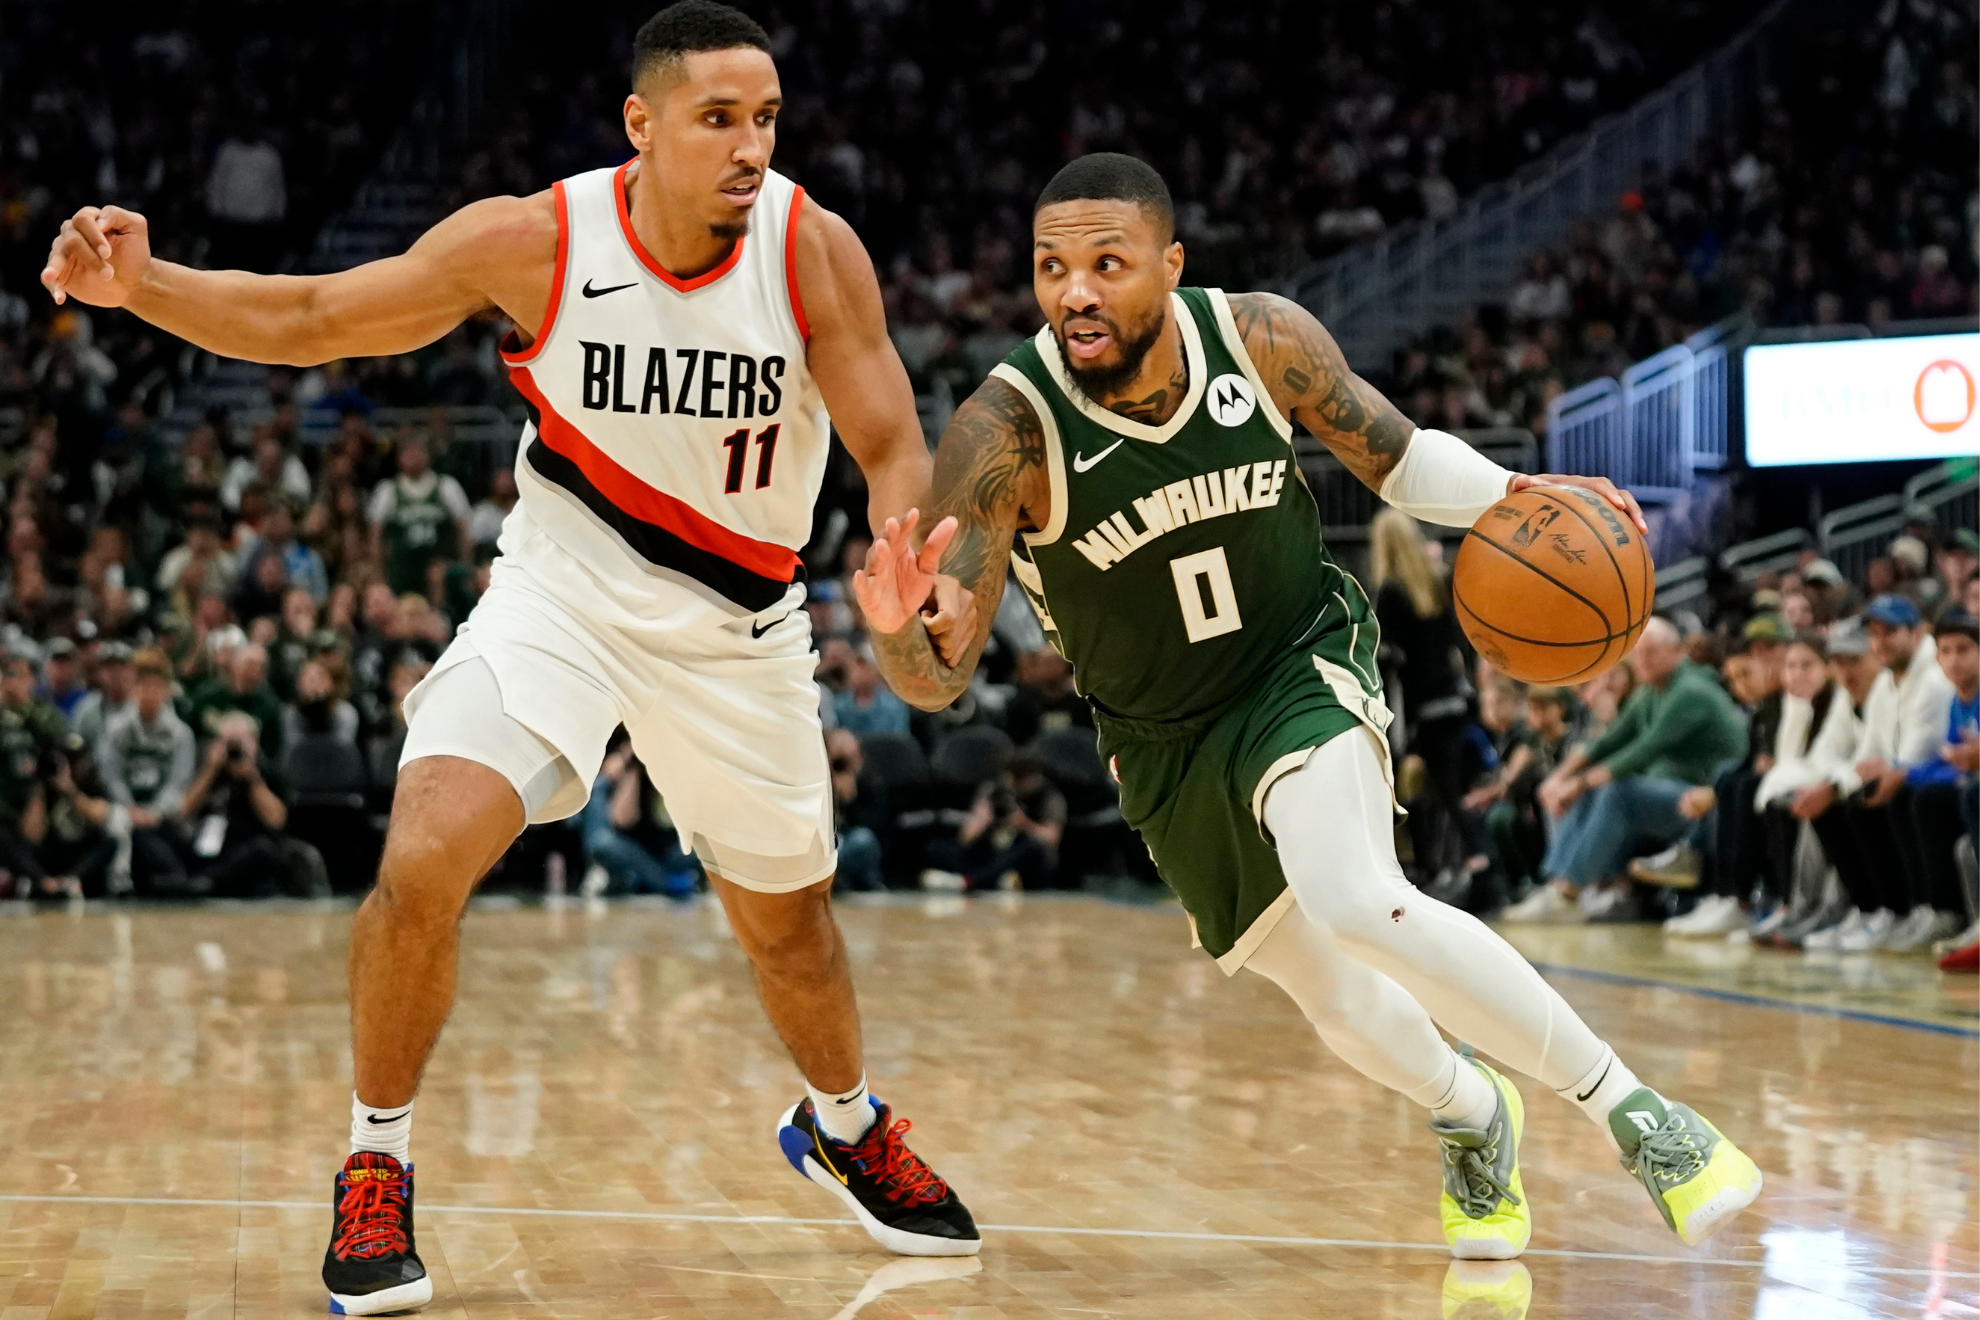 Lillard (right) scored 31 points in his first game against Portland.